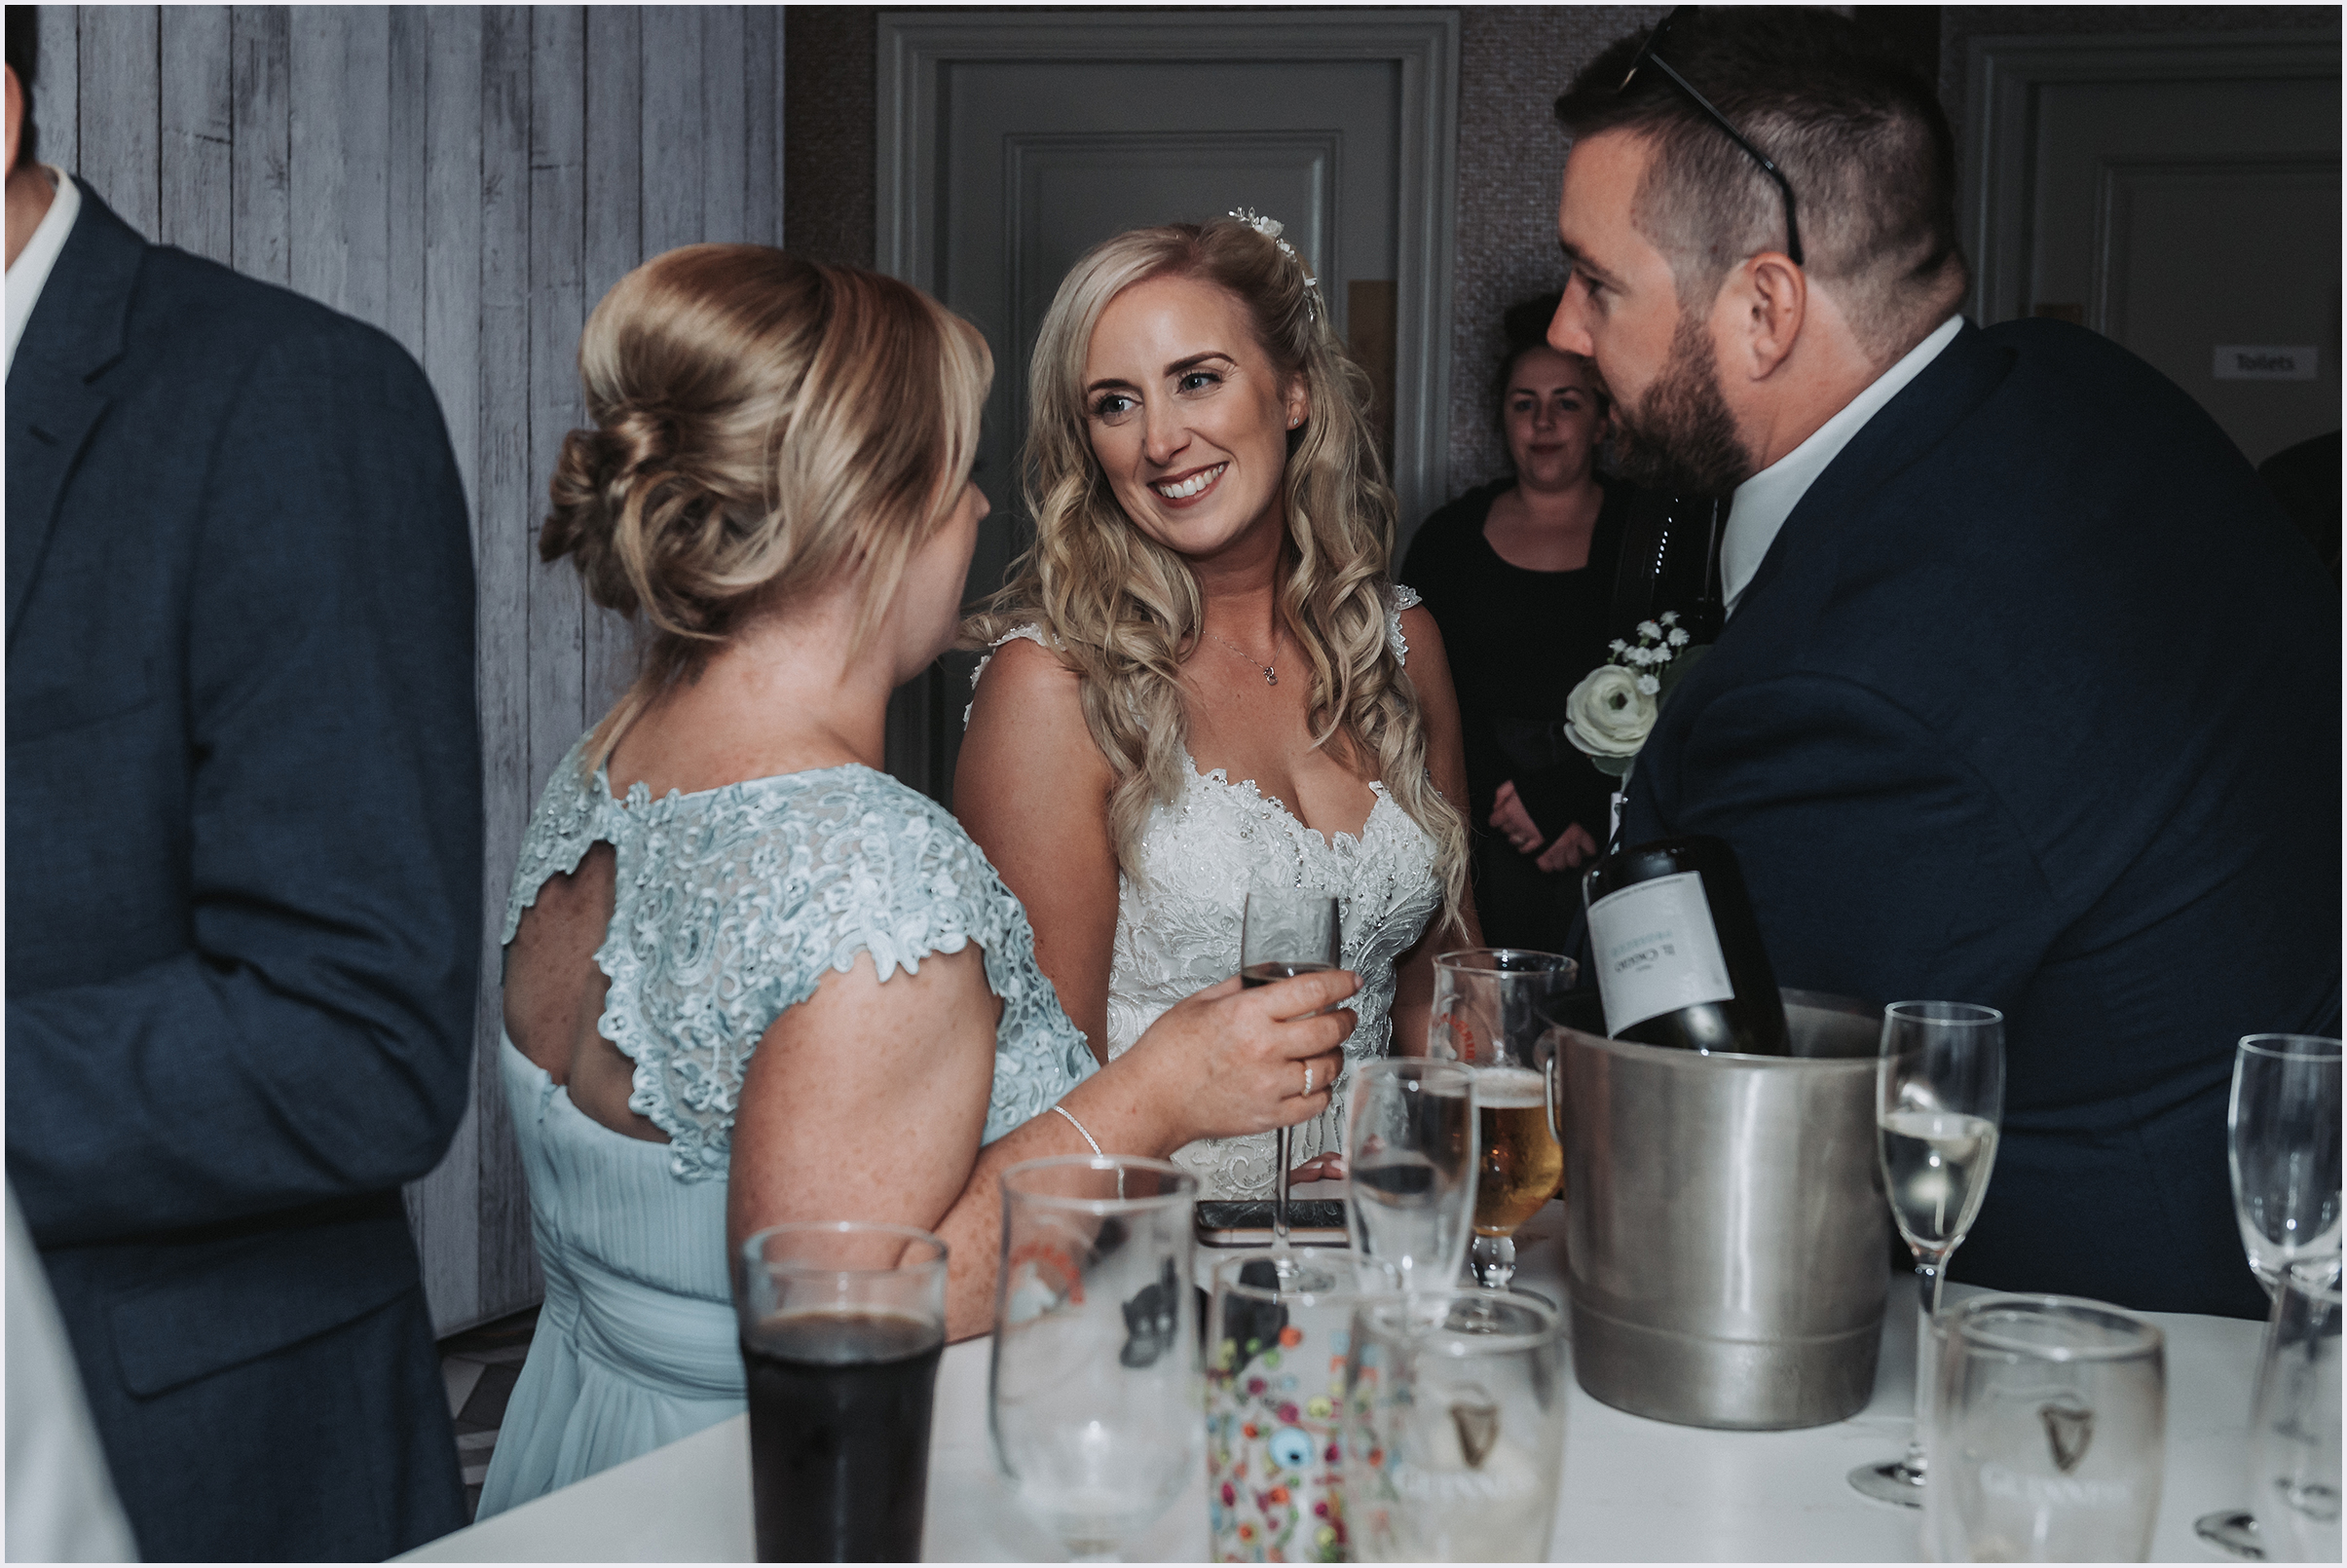 A bride smiling happily at one her bridesmaids as they chat at the drinks reception at The Grosvenor Pulford Hotel and Spa